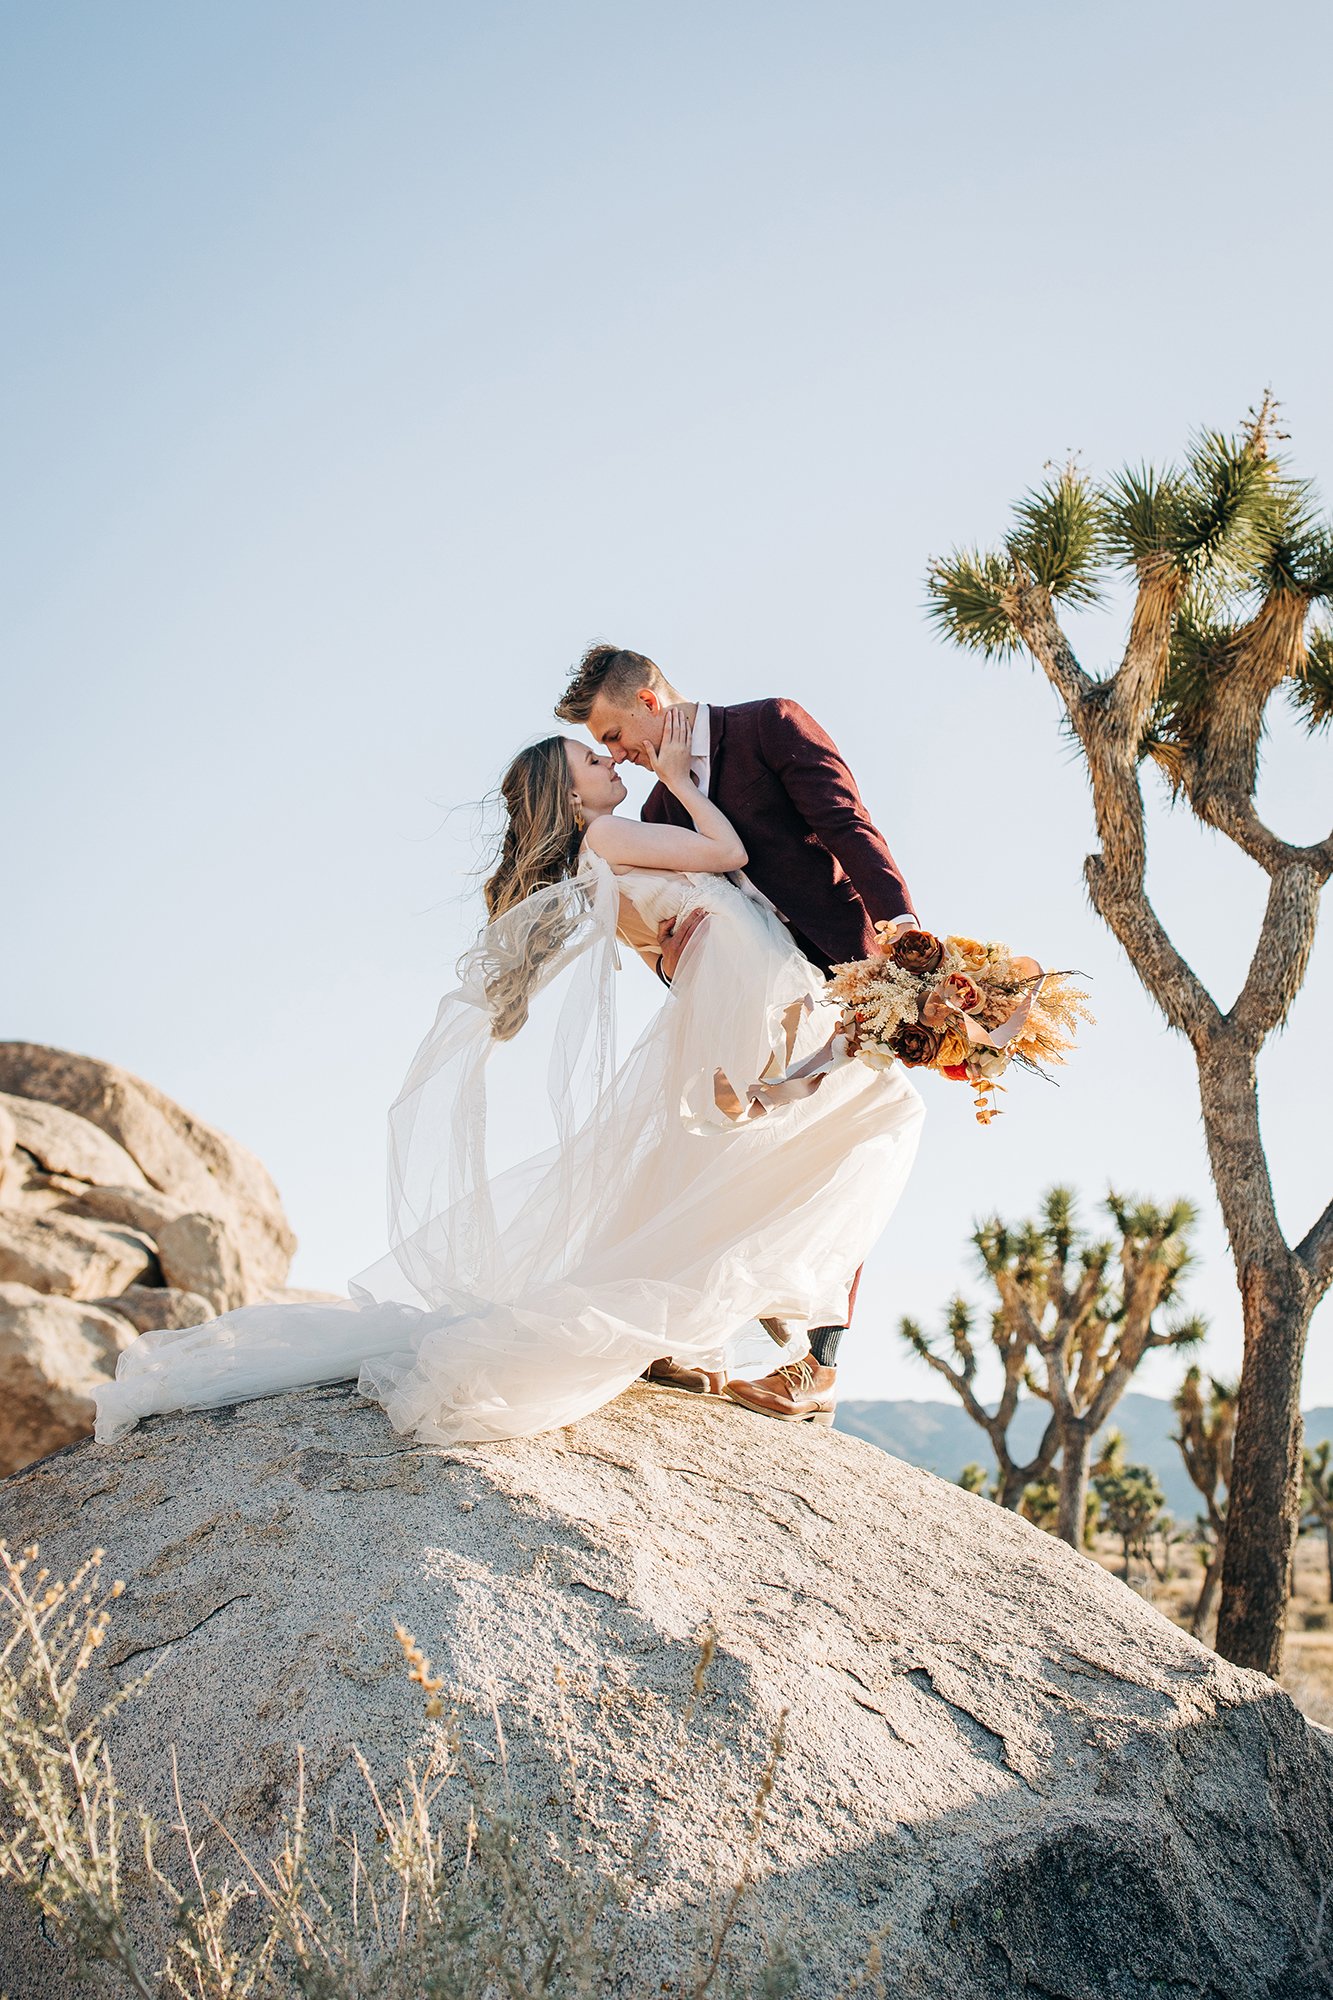 how-to-elope-in-joshua-tree-national-park-5.jpg